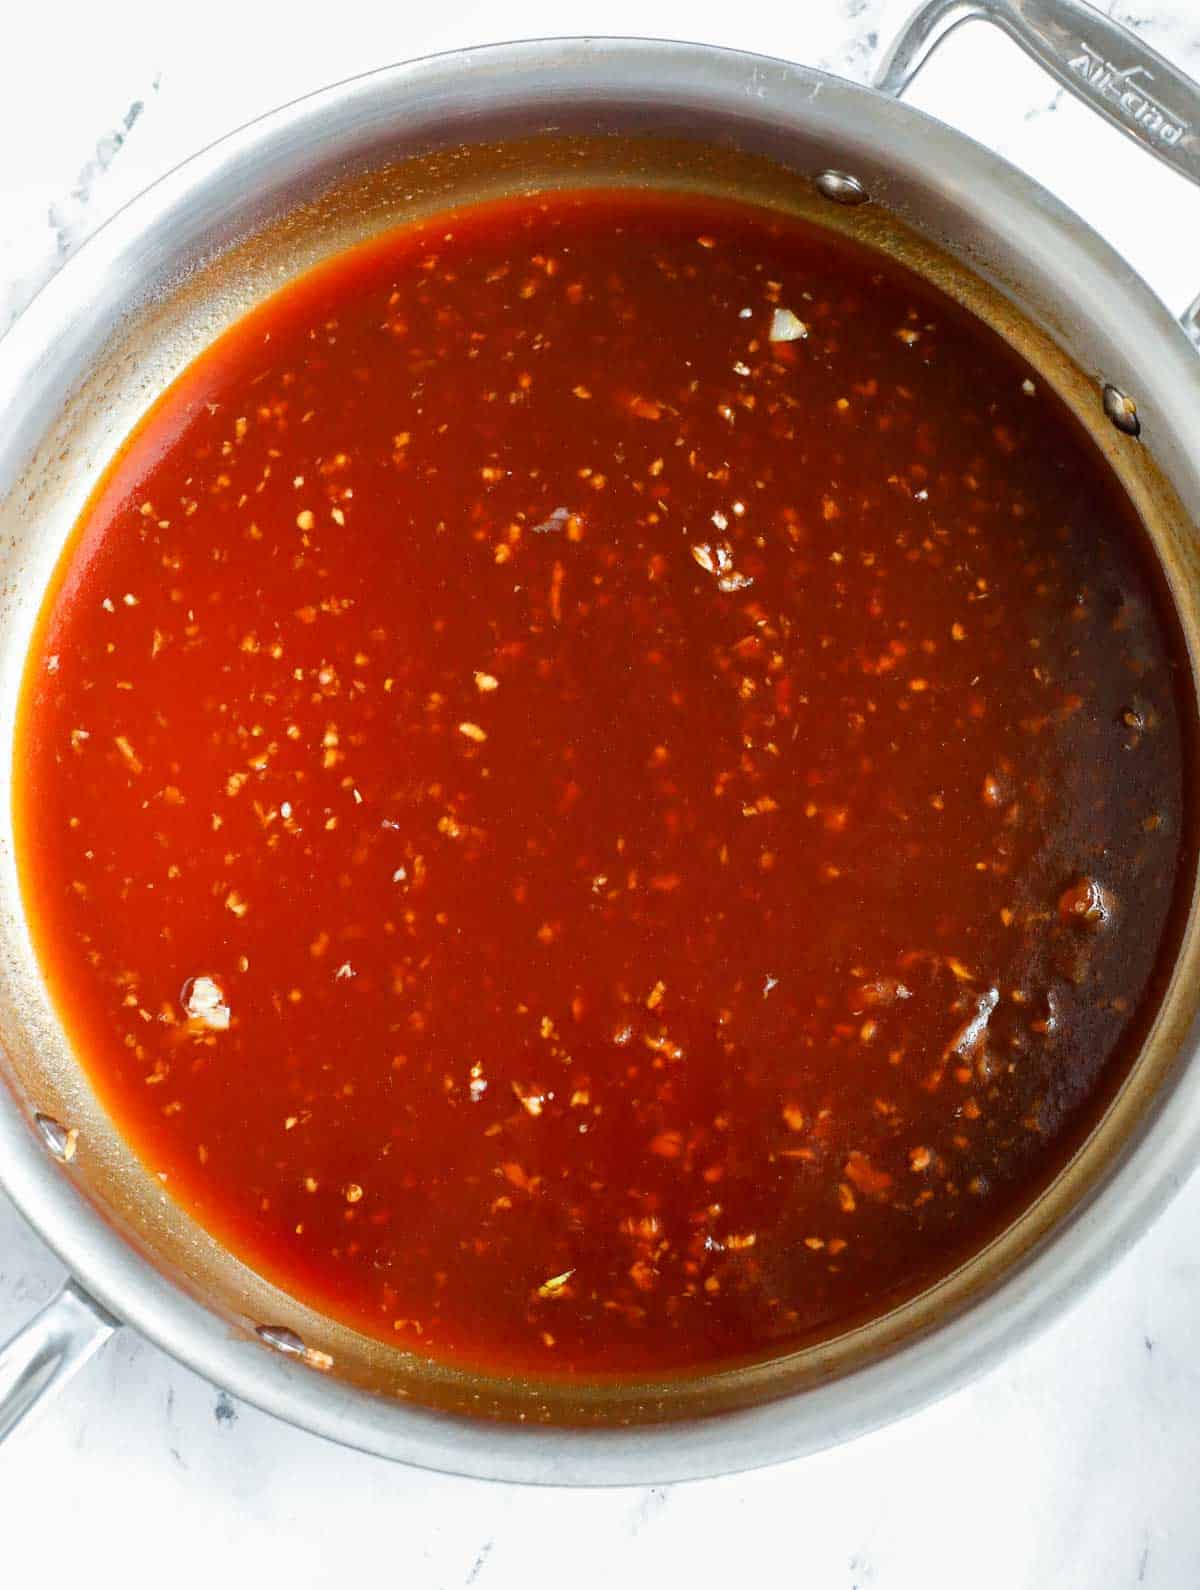 How to make easy sweet and sour sauce.